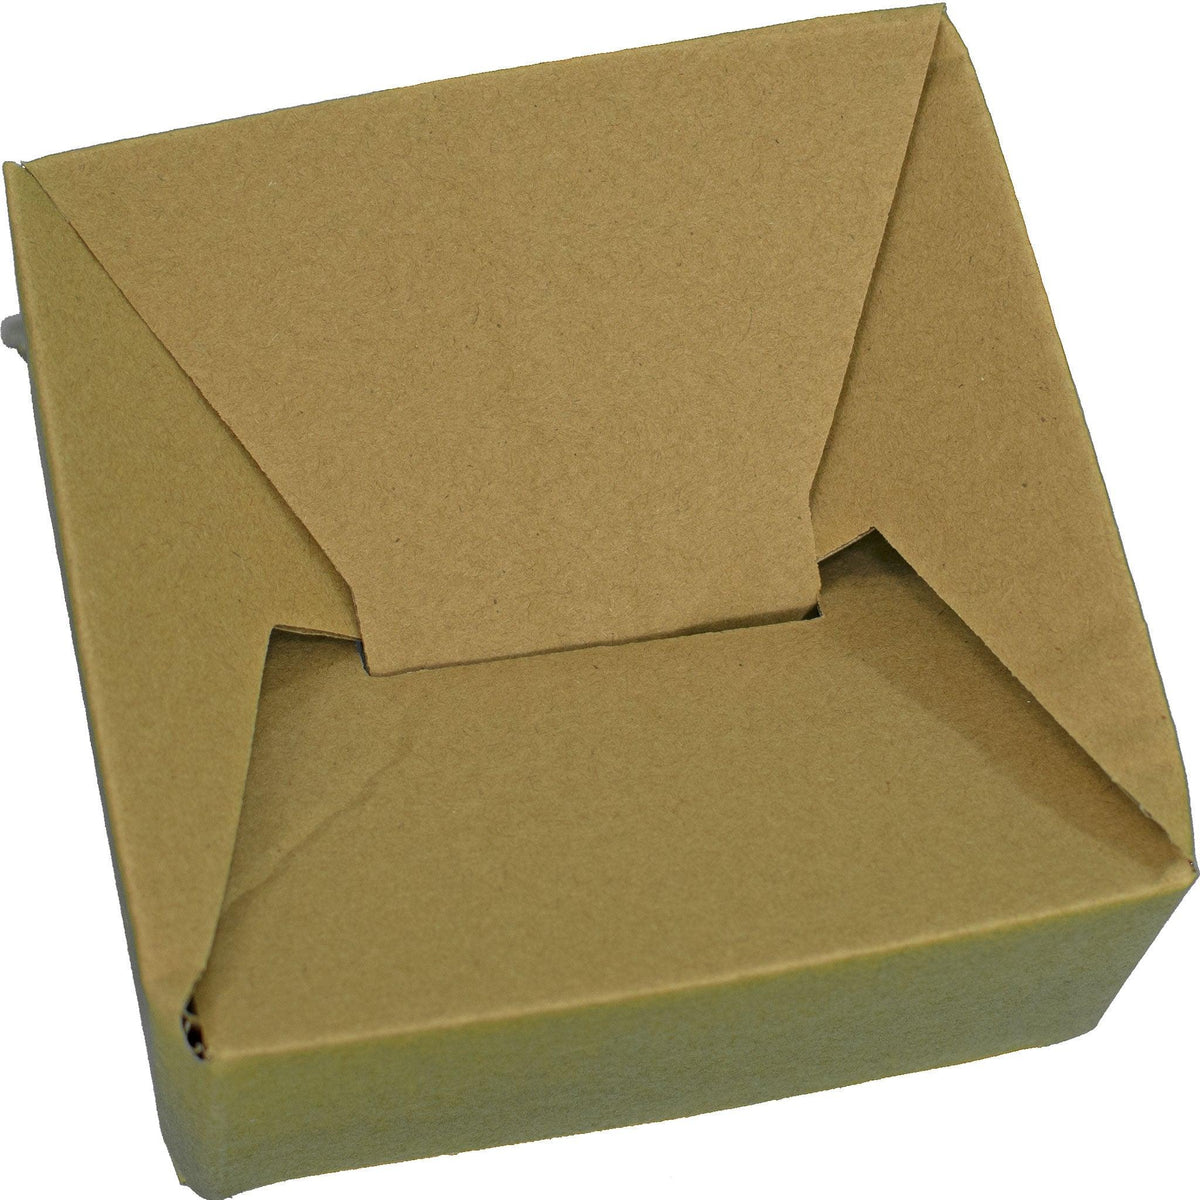 Purchase brand new empty Cardboard Boxes for your C-9 Light Bulbs from Lee Display. Organize your holiday lights, store your bulbs safely, and keep them safe from water damage. On sale now at leedisplay.com